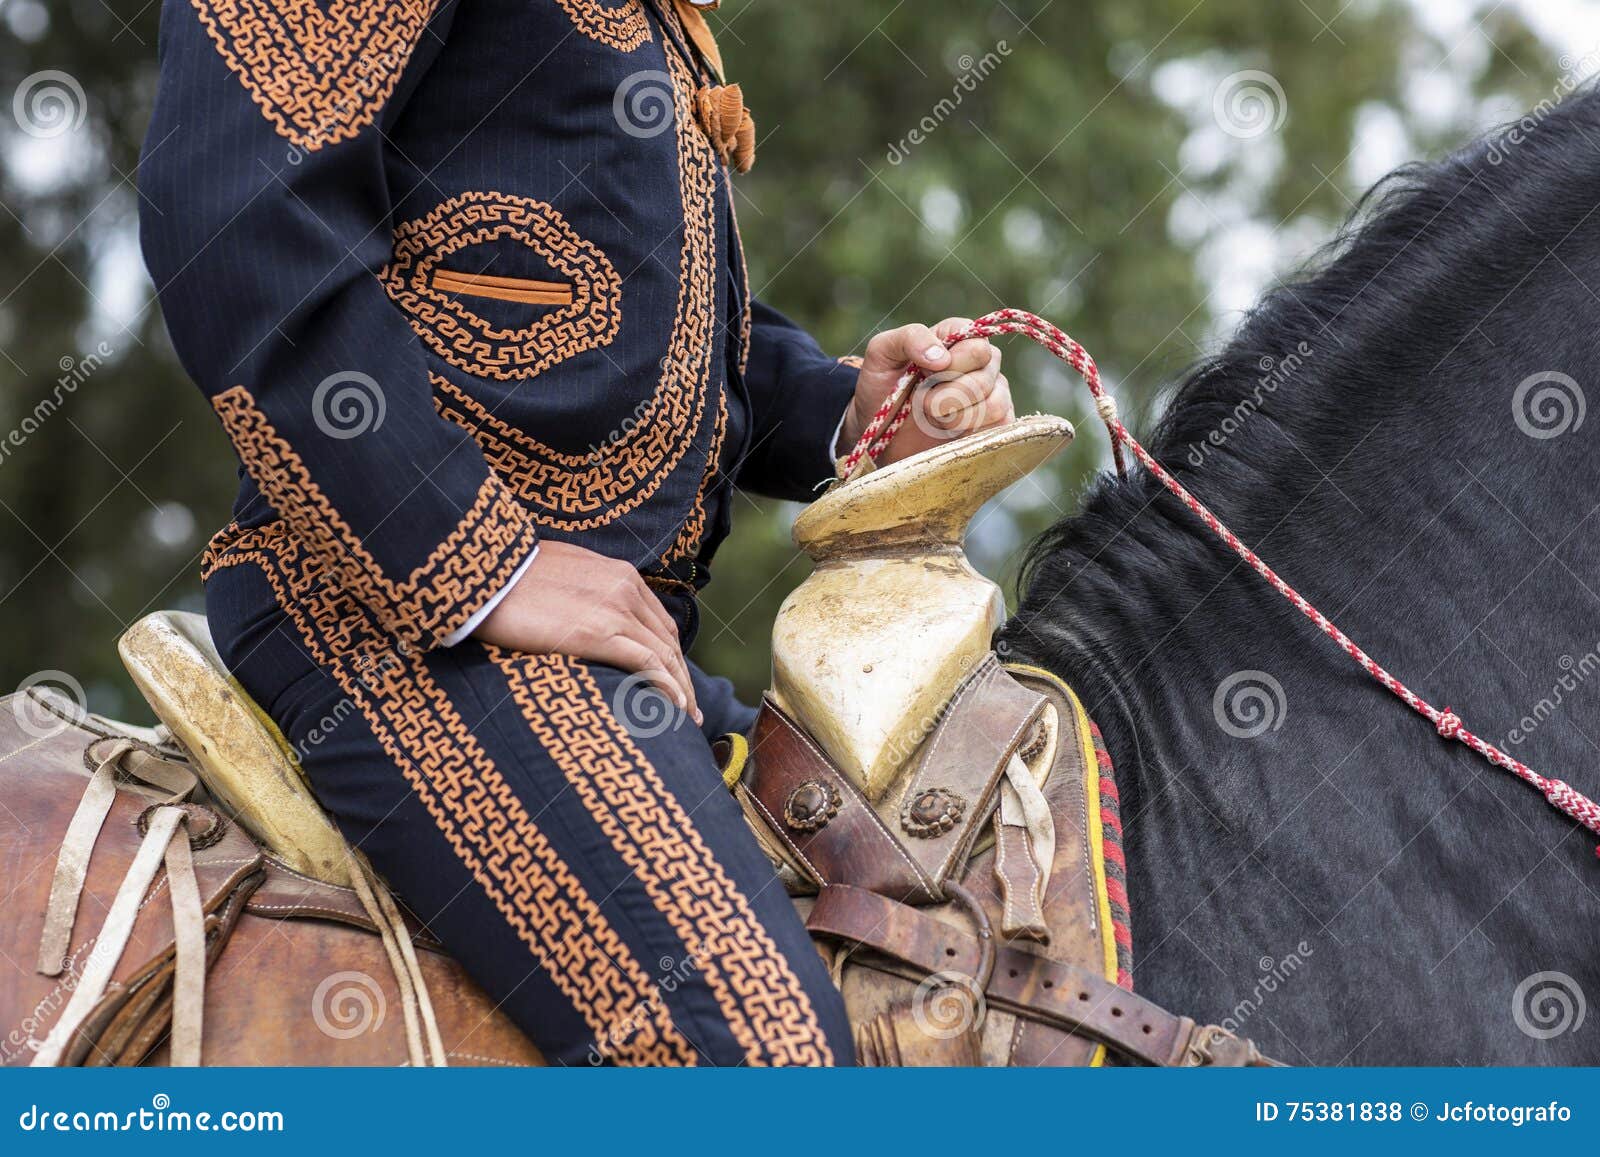 mexican charro with traditional dress riding